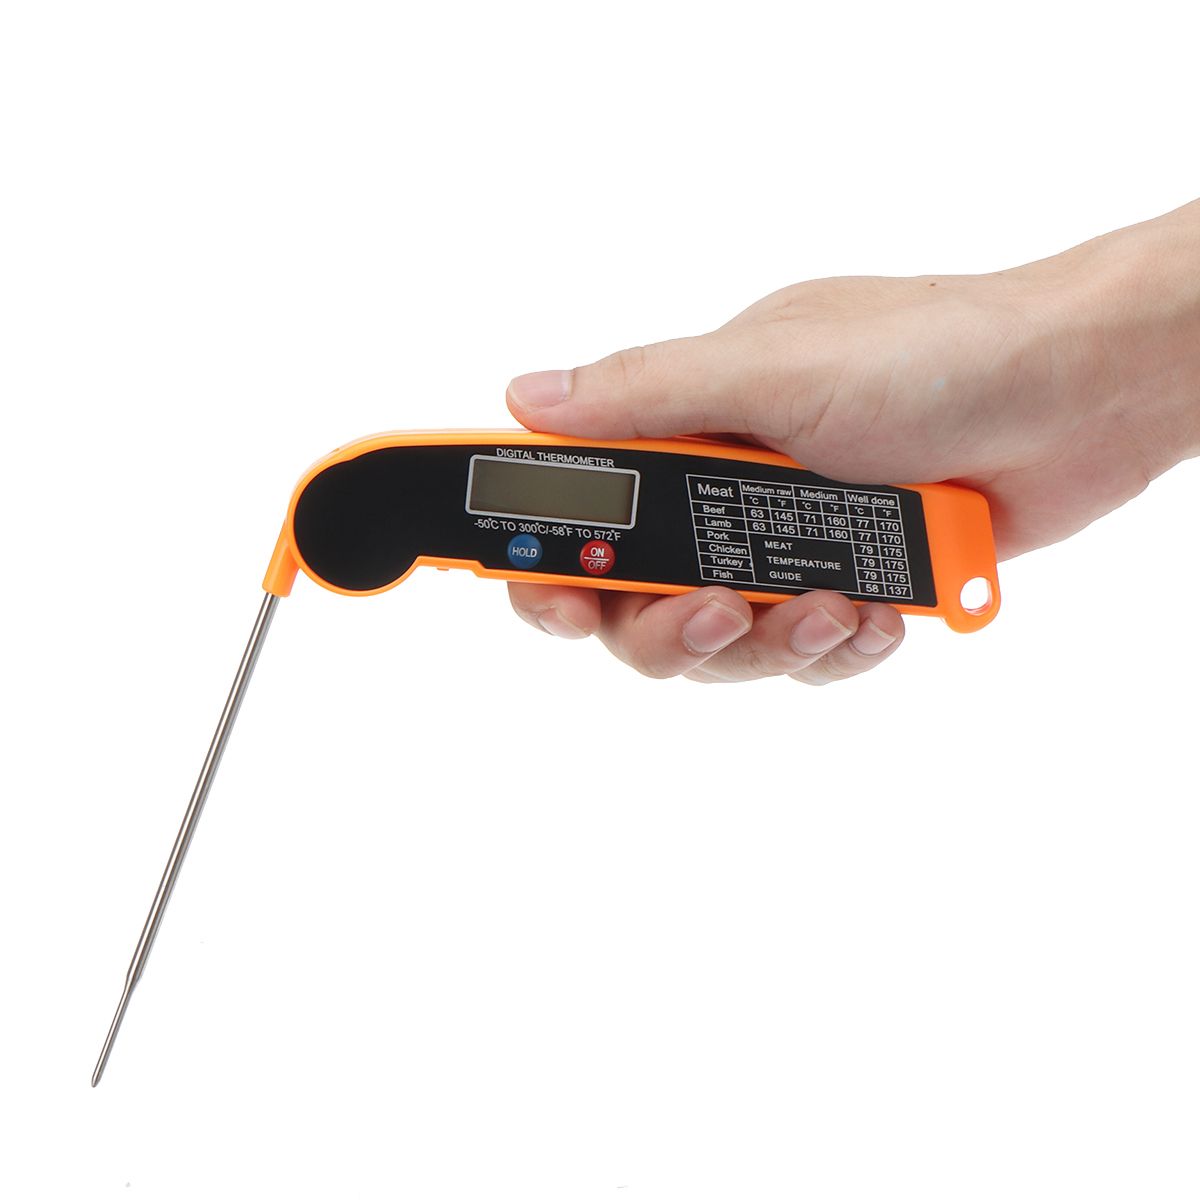 Digital-Thermometer-Meat-Cooking-Probe-BBQ-Electronic-Oven-Folding-Kitchen-Thermometer-1718149